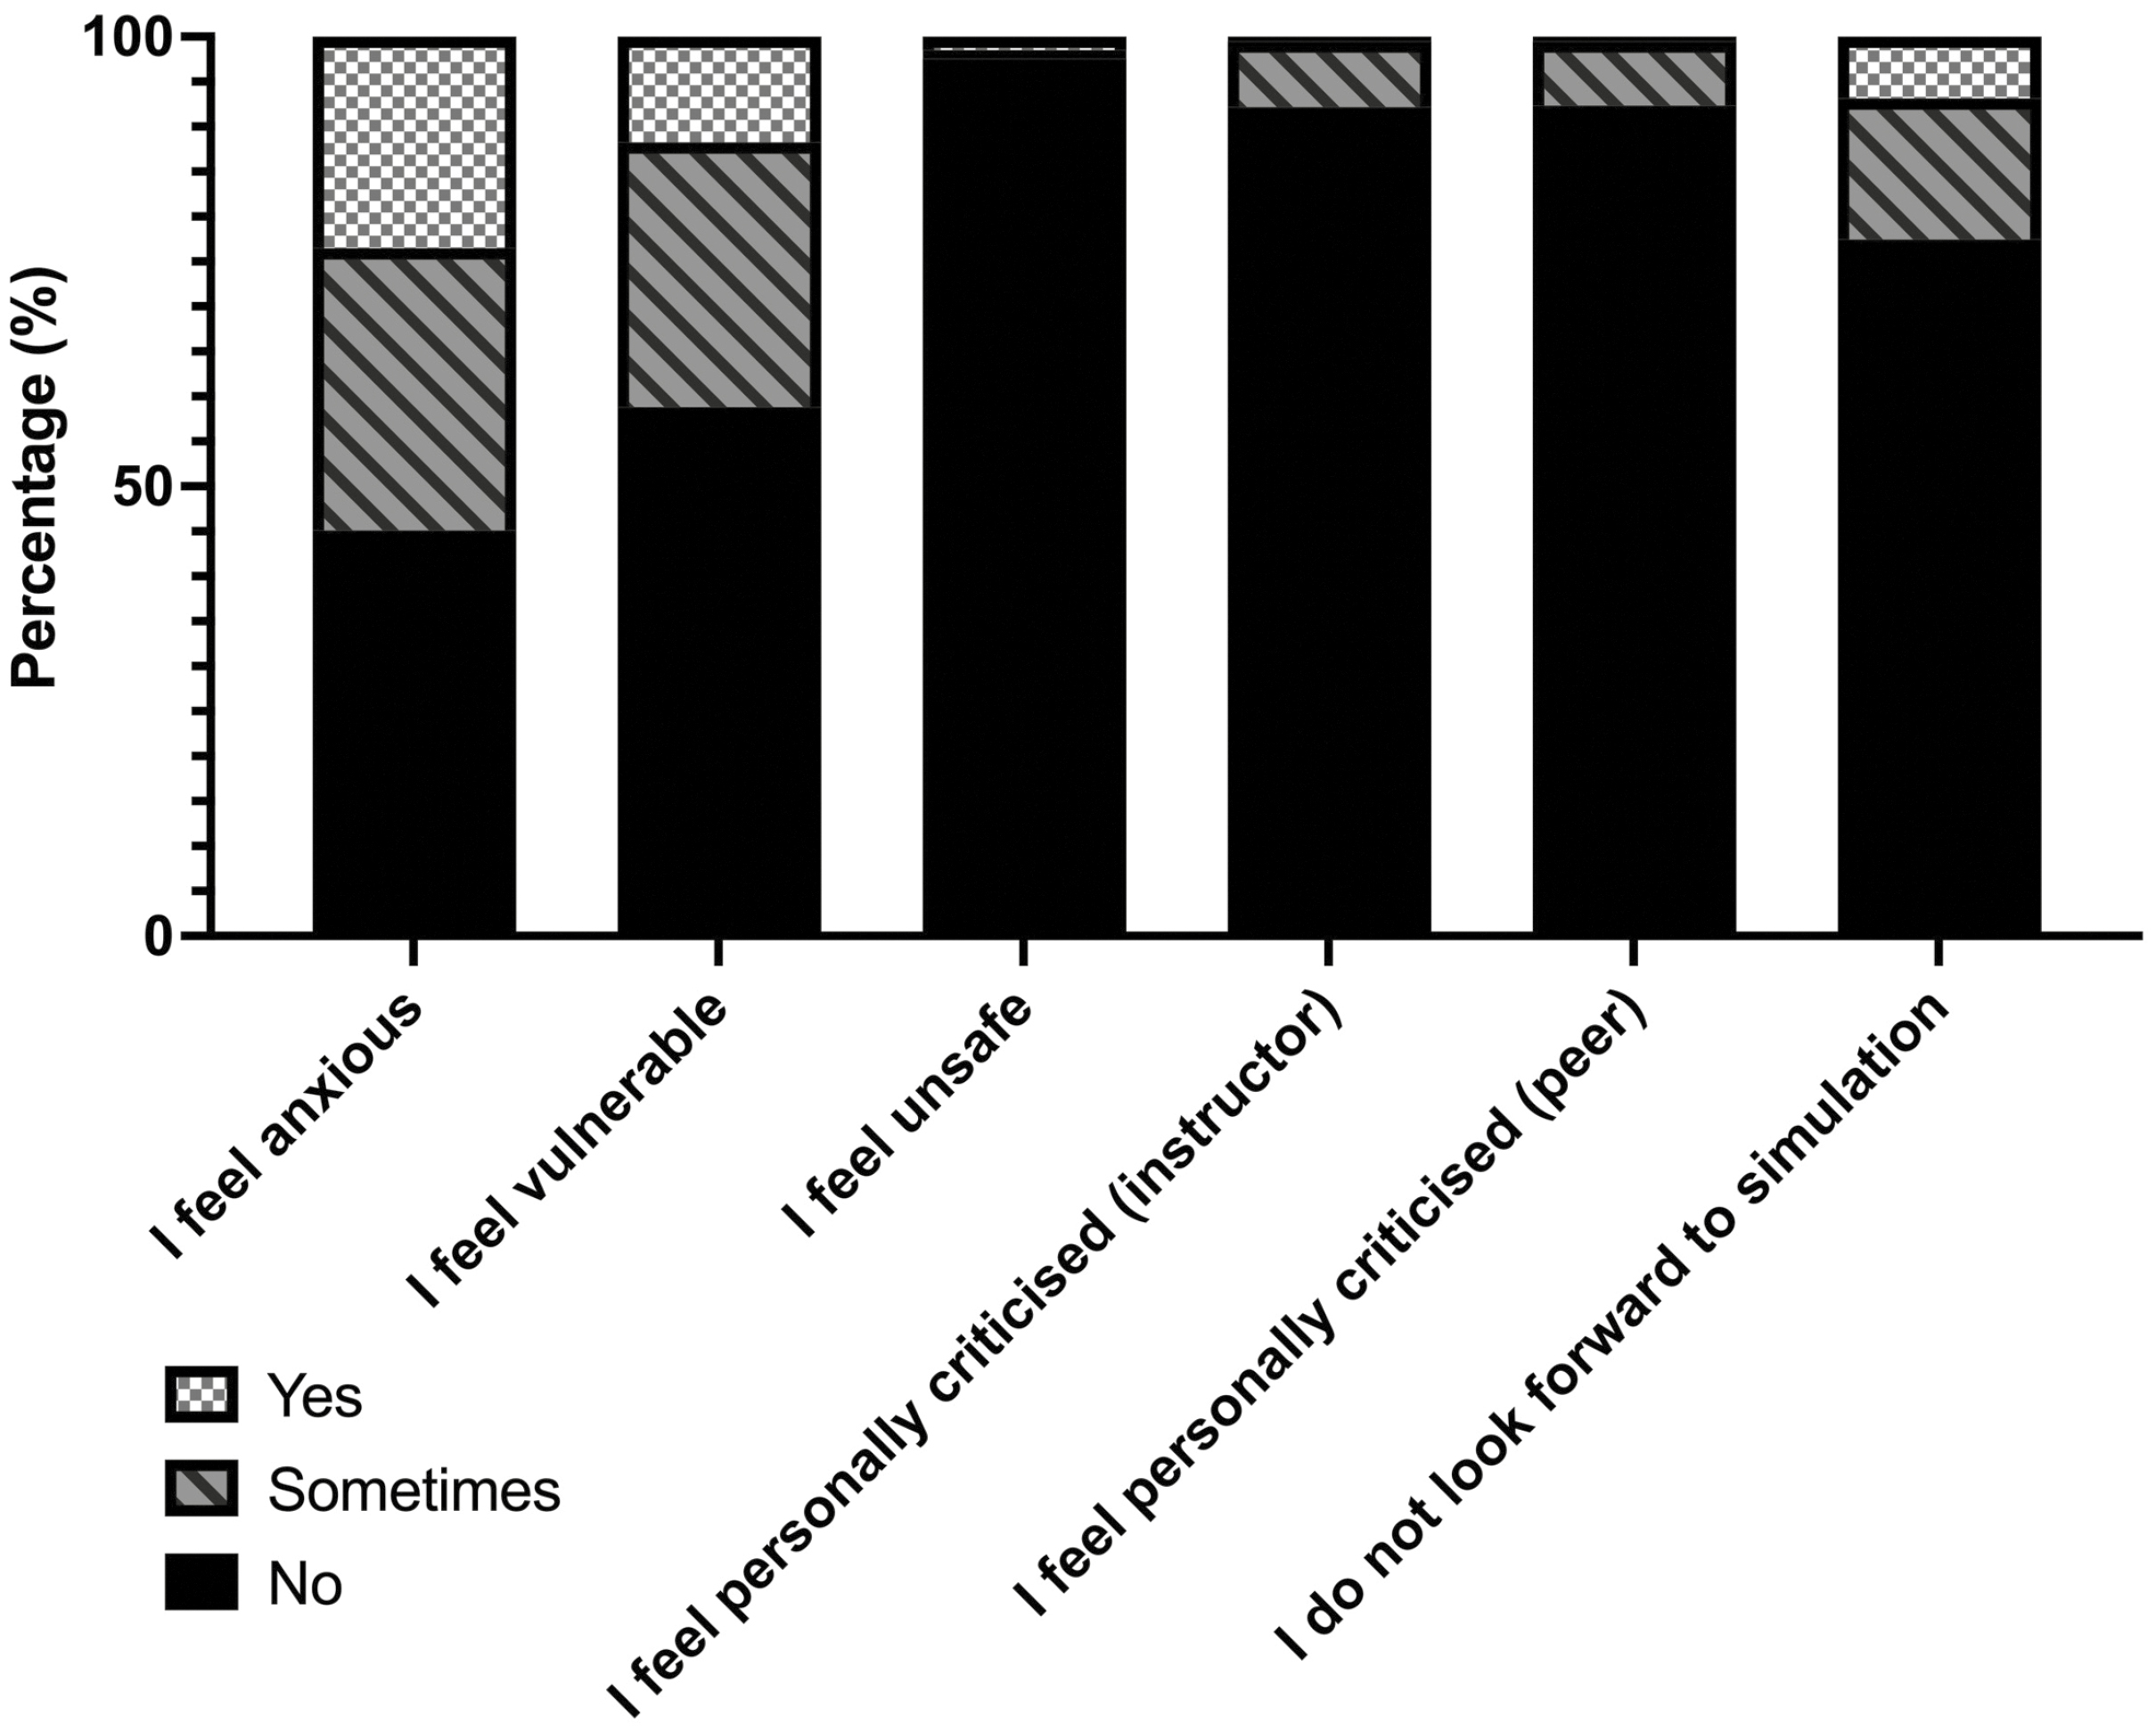 Students’ responses to how often they have had negative experiences during SBE using a 5-point Likert scale (0 – Never, 4 – Always). Results are presented as: ‘Yes’ – Likert scale 0–1; ‘Sometimes’ – Likert scale 2; ‘No’ – Likert scale 3–4